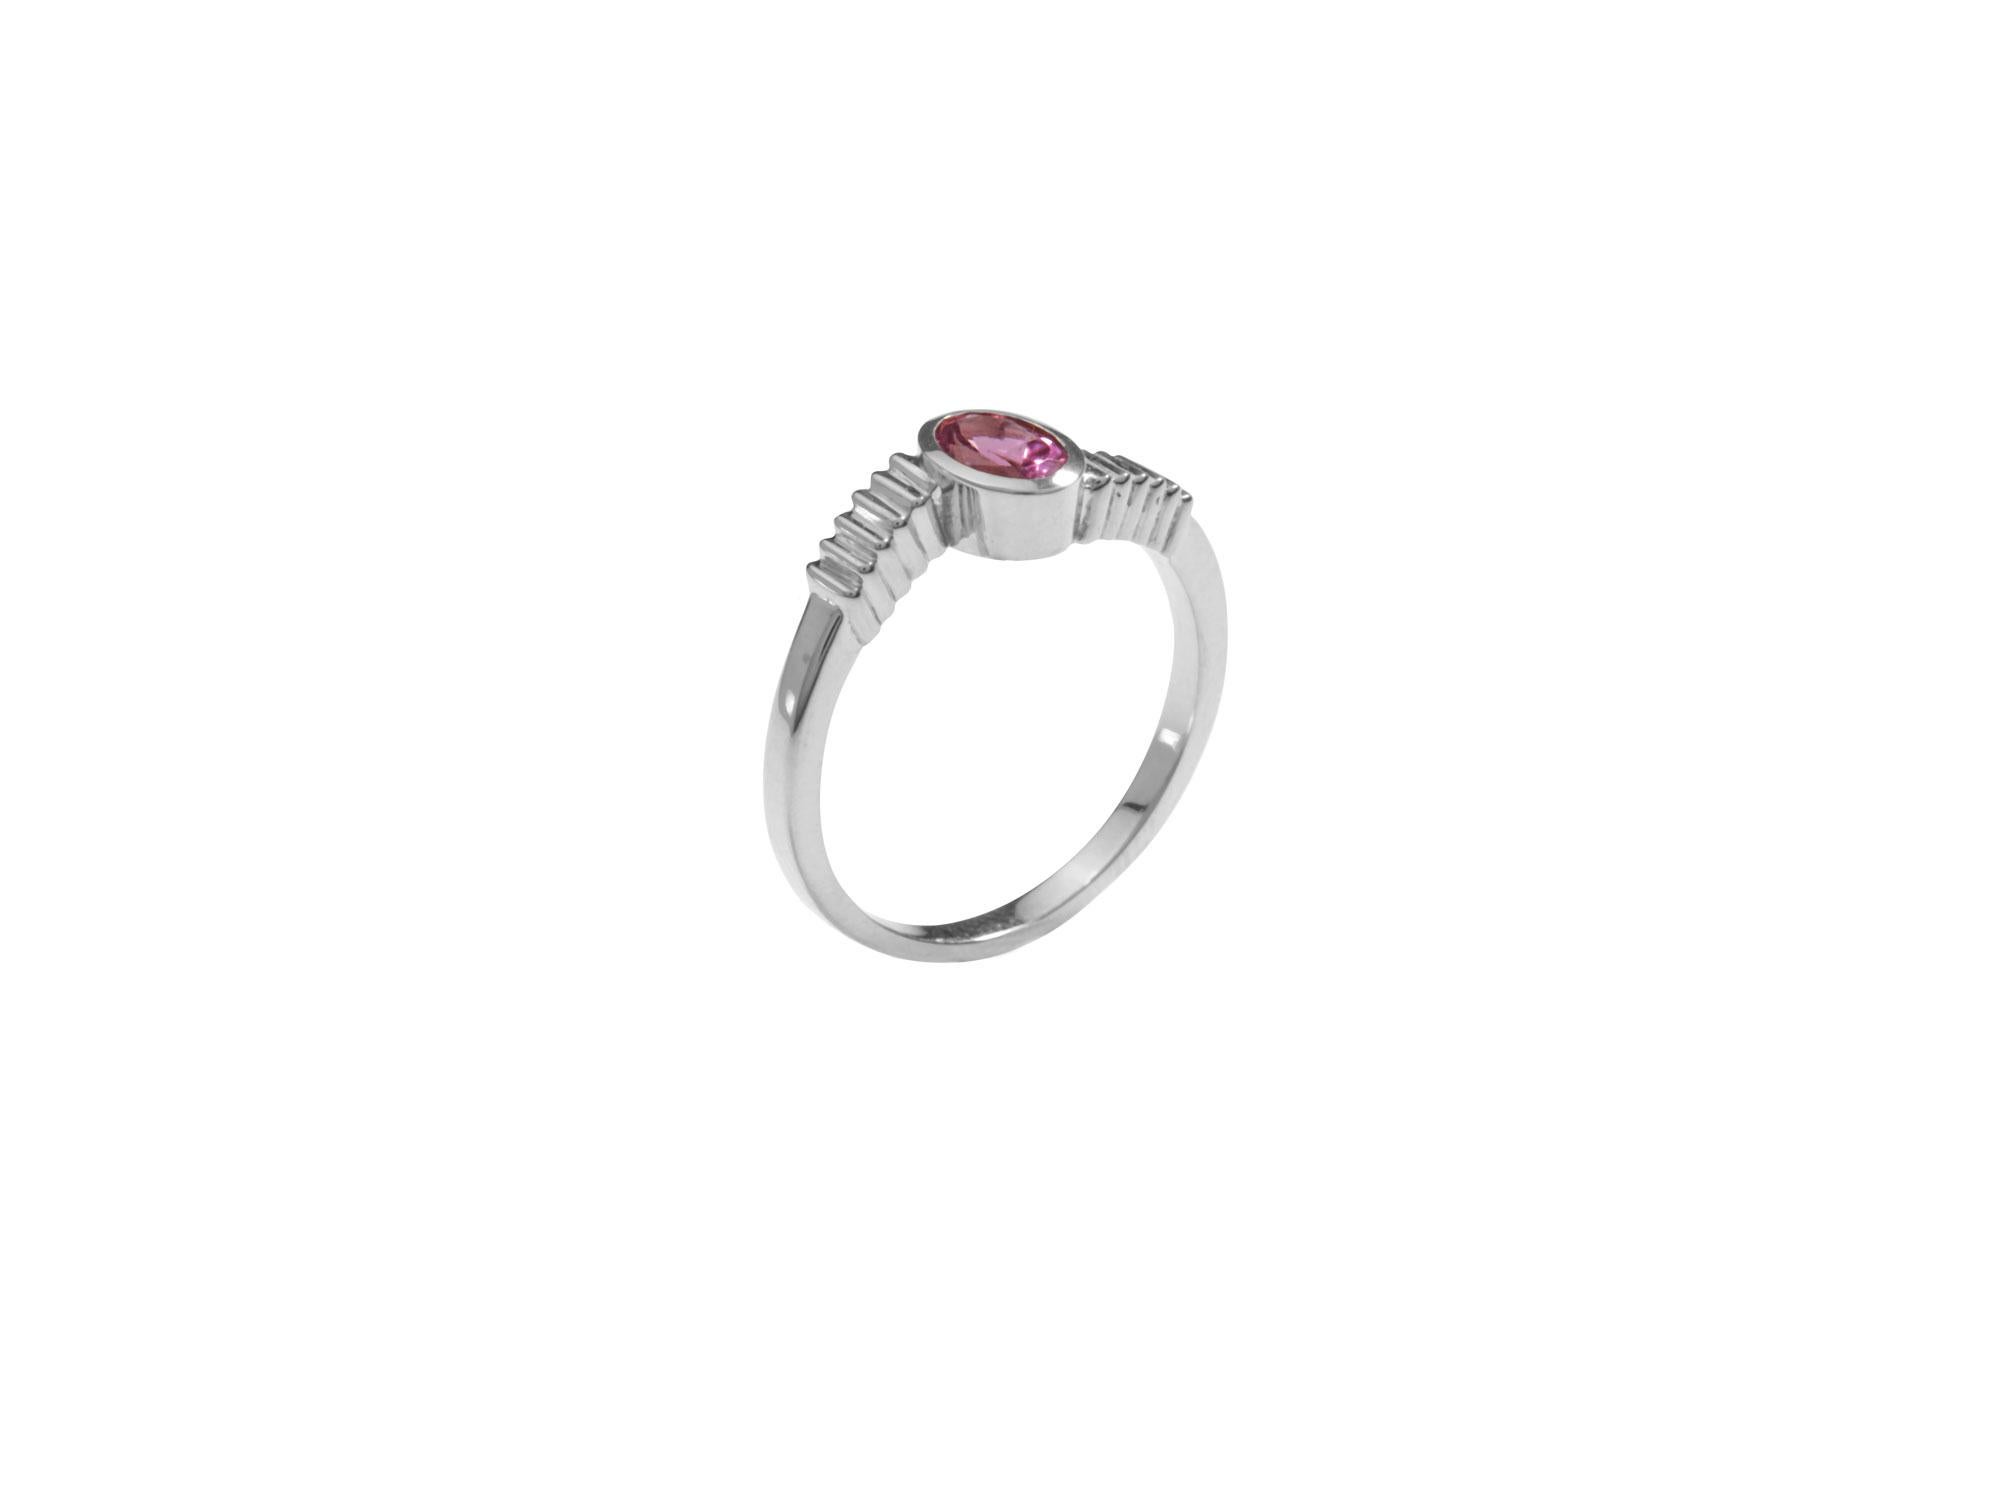 When simplicity meets the extraordinary. Mix & Match

•	18 Karat Recycled White Gold 
•	Weight: approx. 4 gr gold
•	Pink sapphire 6×5 mm oval cut
•	0,50 ct
•	Origin: Ceylon mine, Sri Lanka
•	Hand-made in Spain
•	Bespoke: Yellow, White and Rose